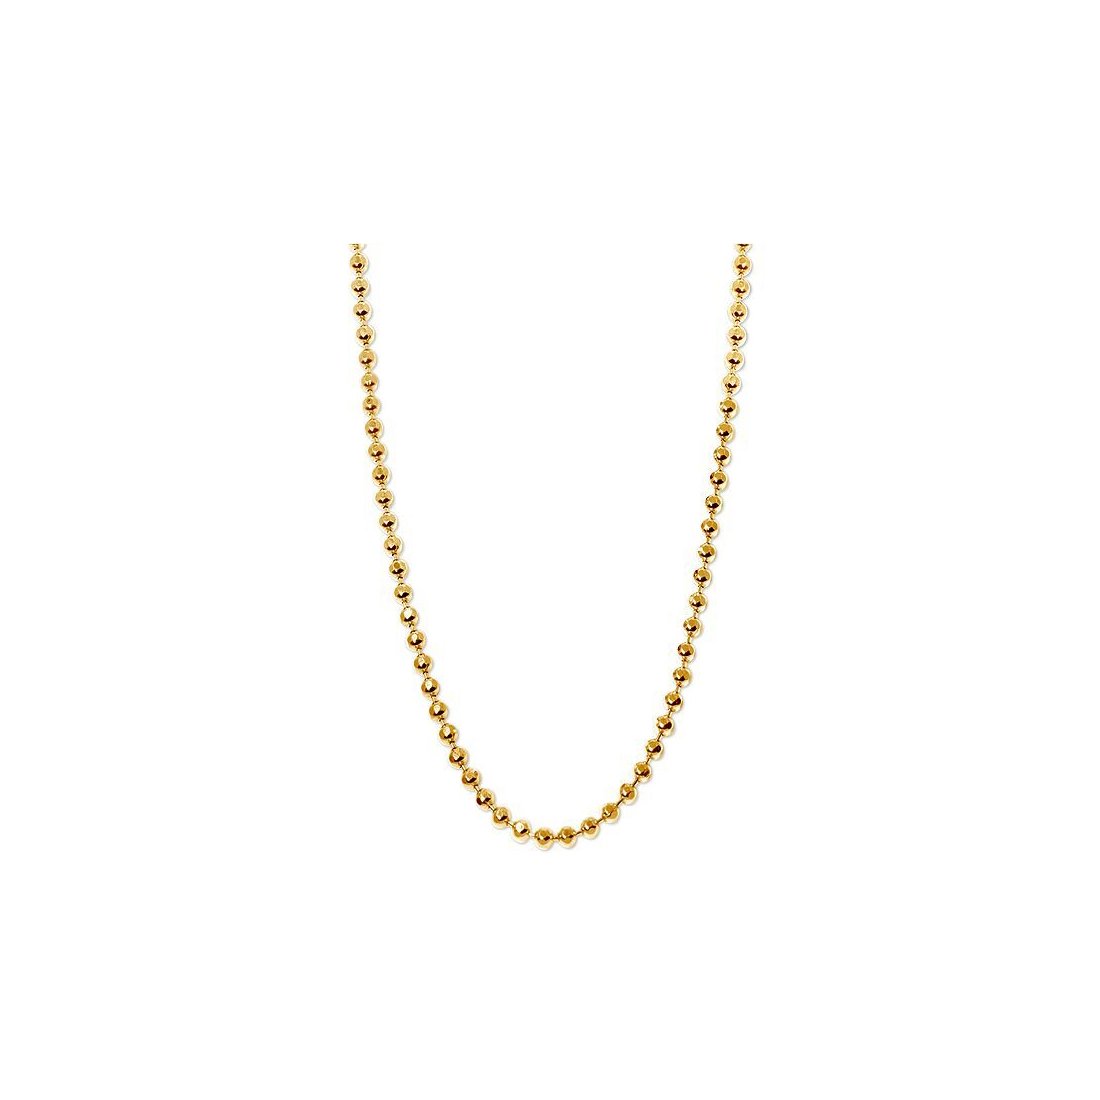 4MM 400 Moon Link Yellow Gold Chain .925 Sterling Silver Sizes 8"-30" Inches